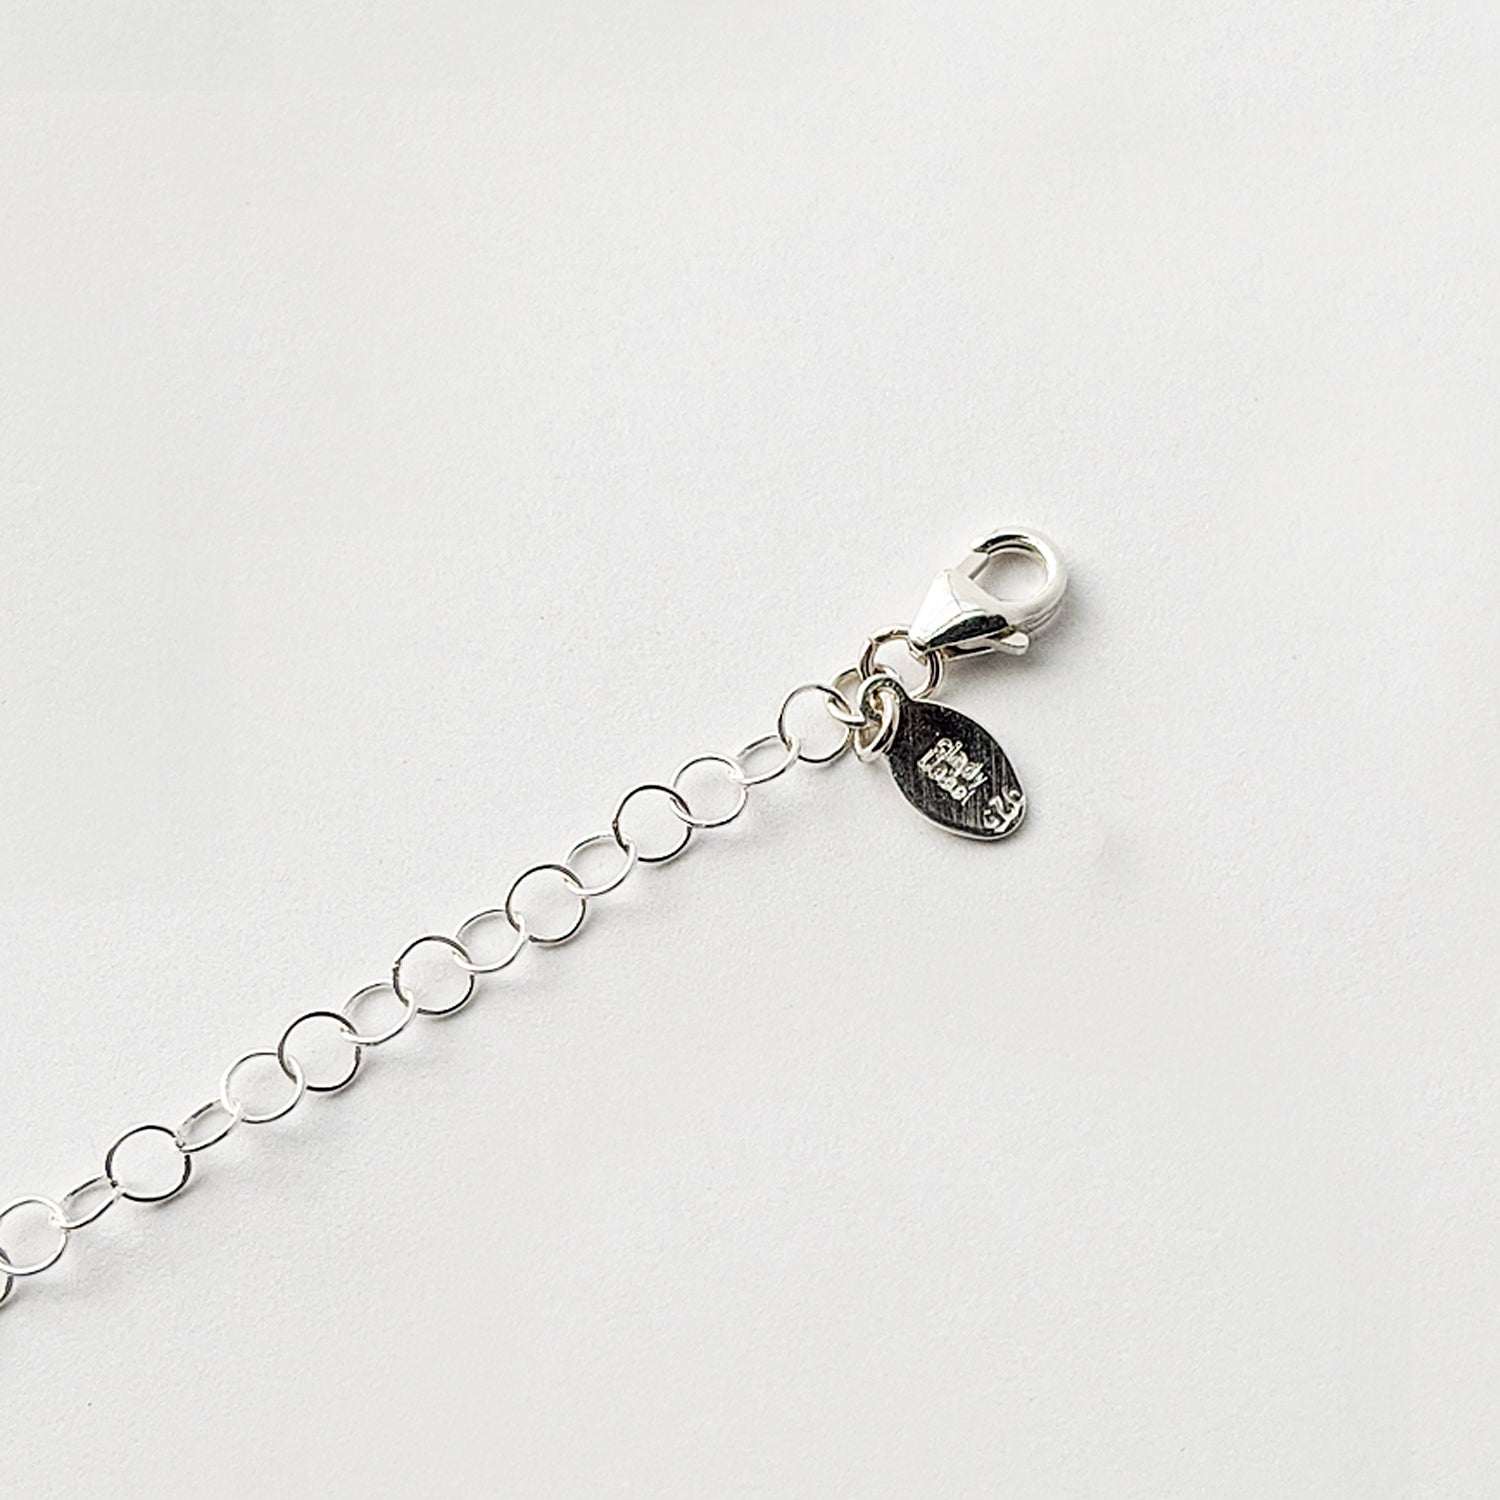 Chain extender with lobster clasp in sterling silver